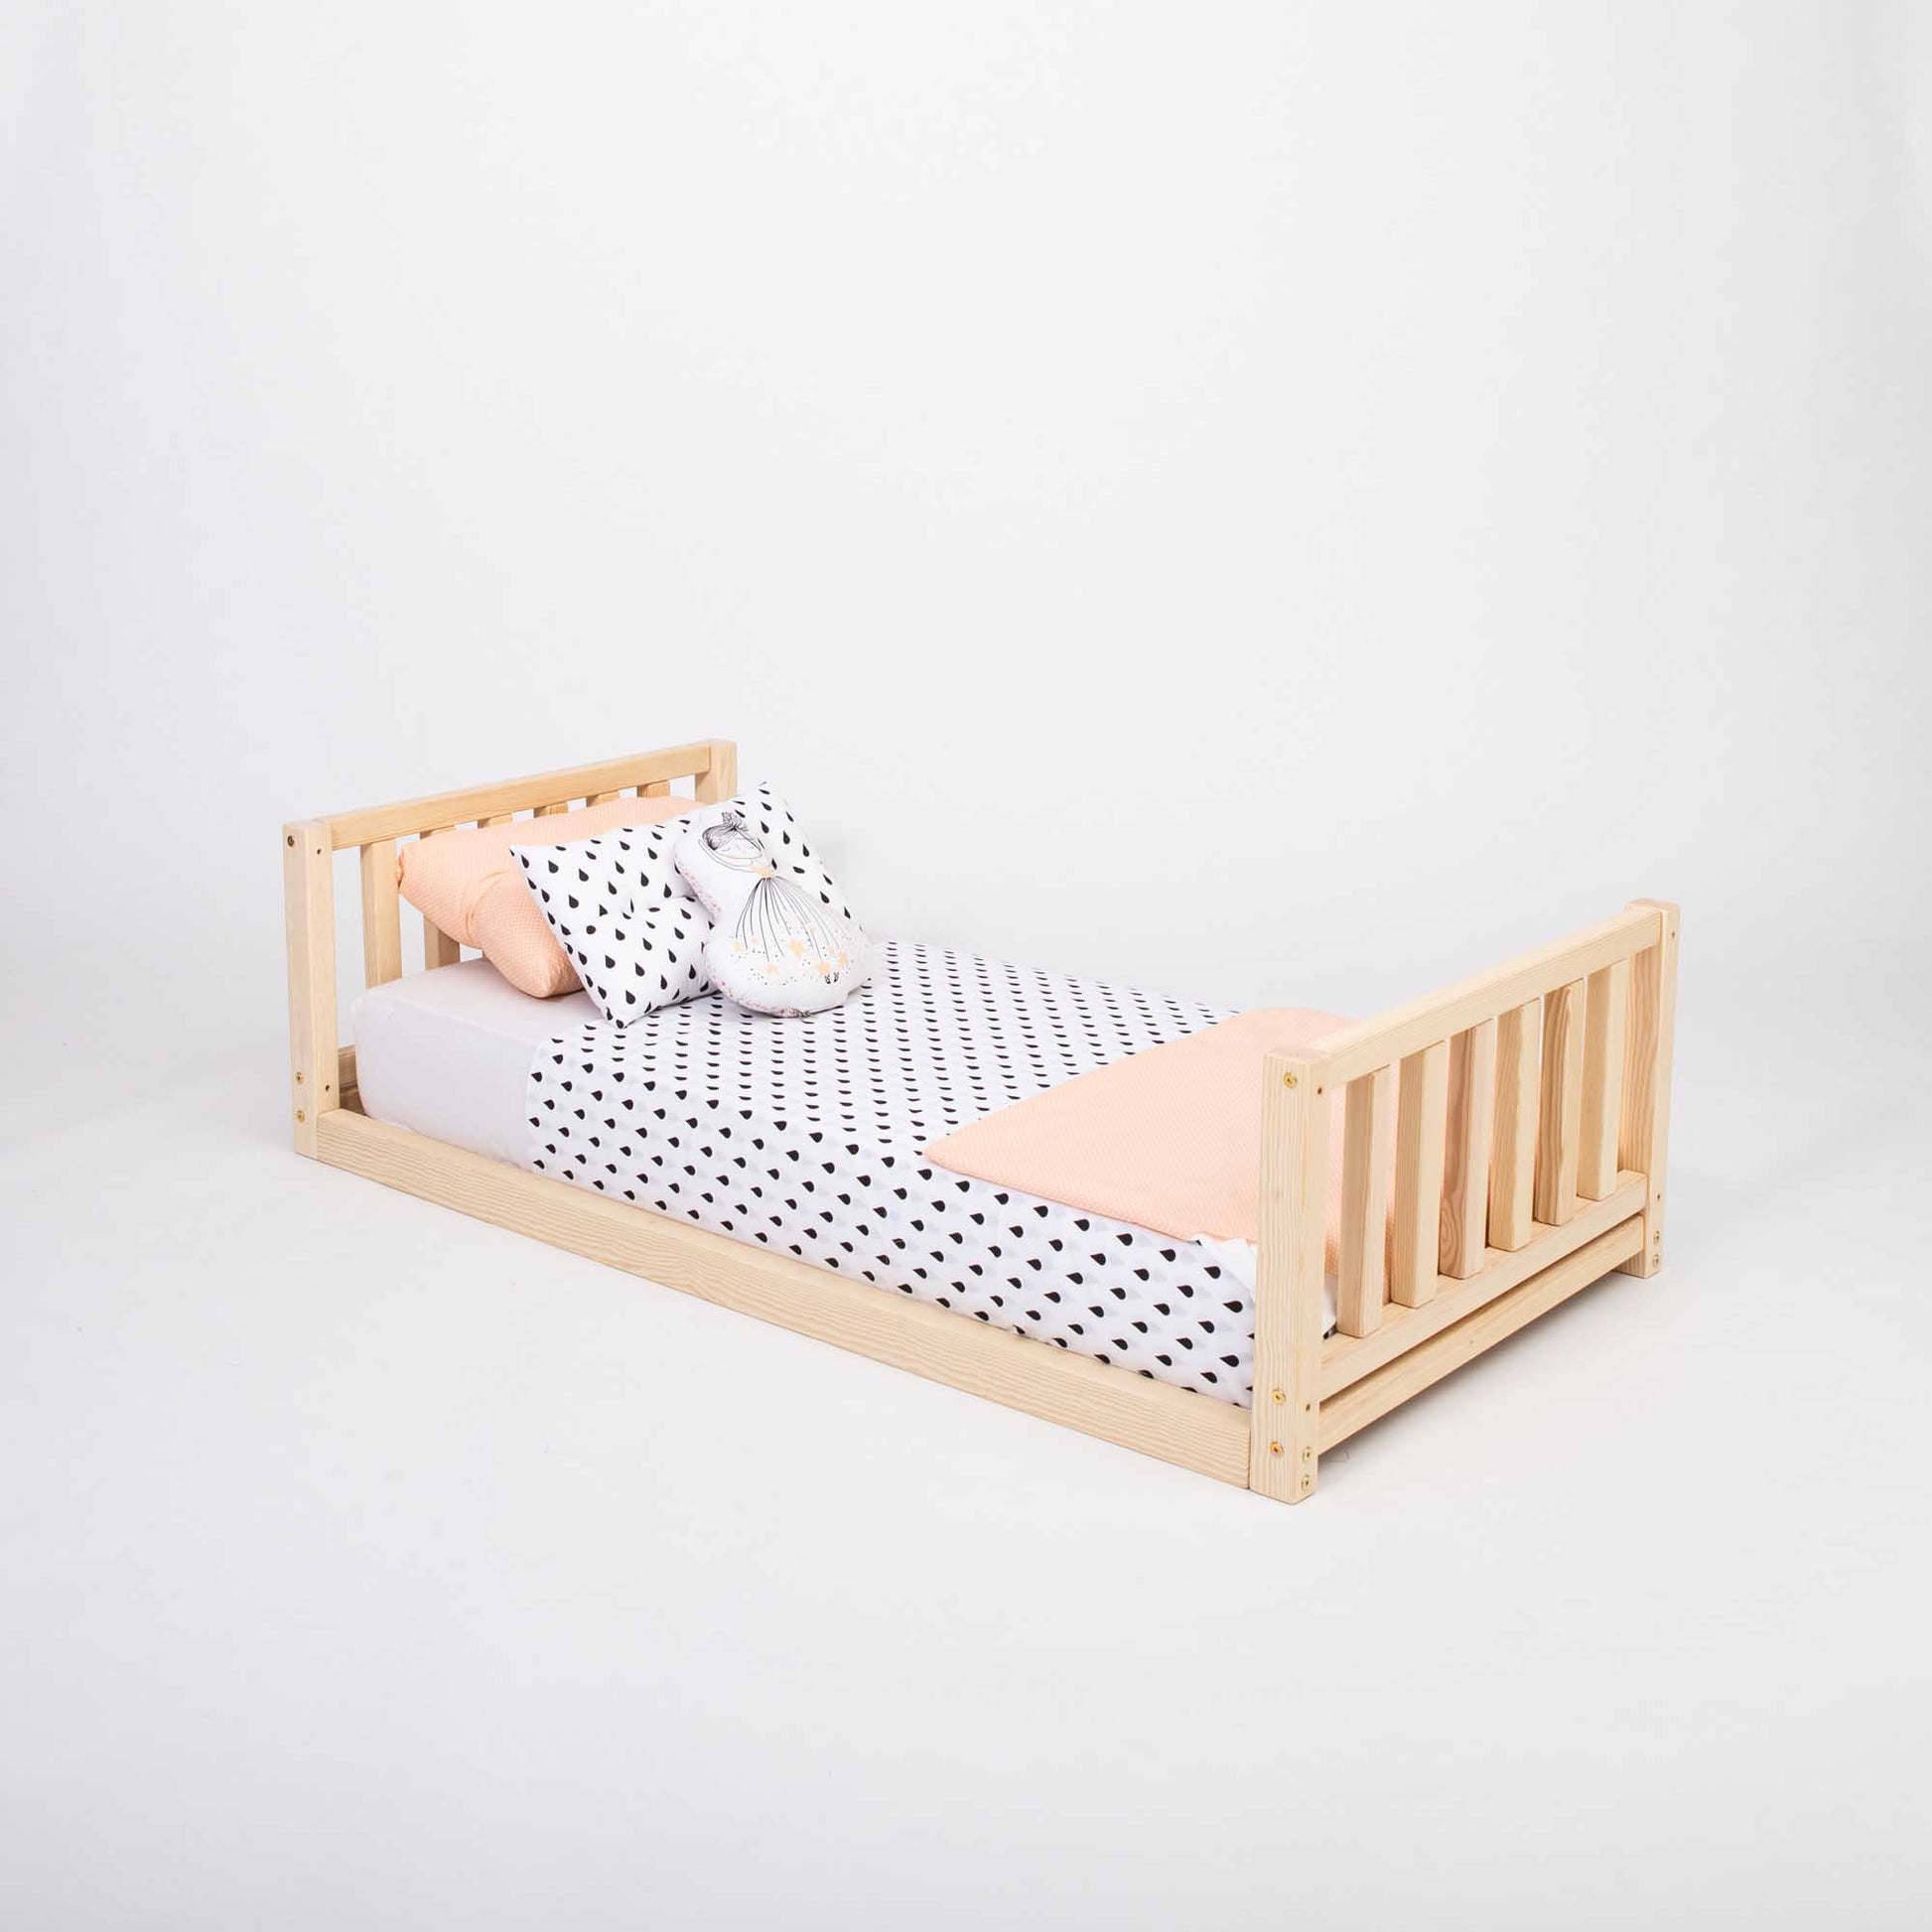 A 2-in-1 kid's bed on legs with a vertical rail headboard and footboard with polka dot bedding made of solid pine or birch wood.